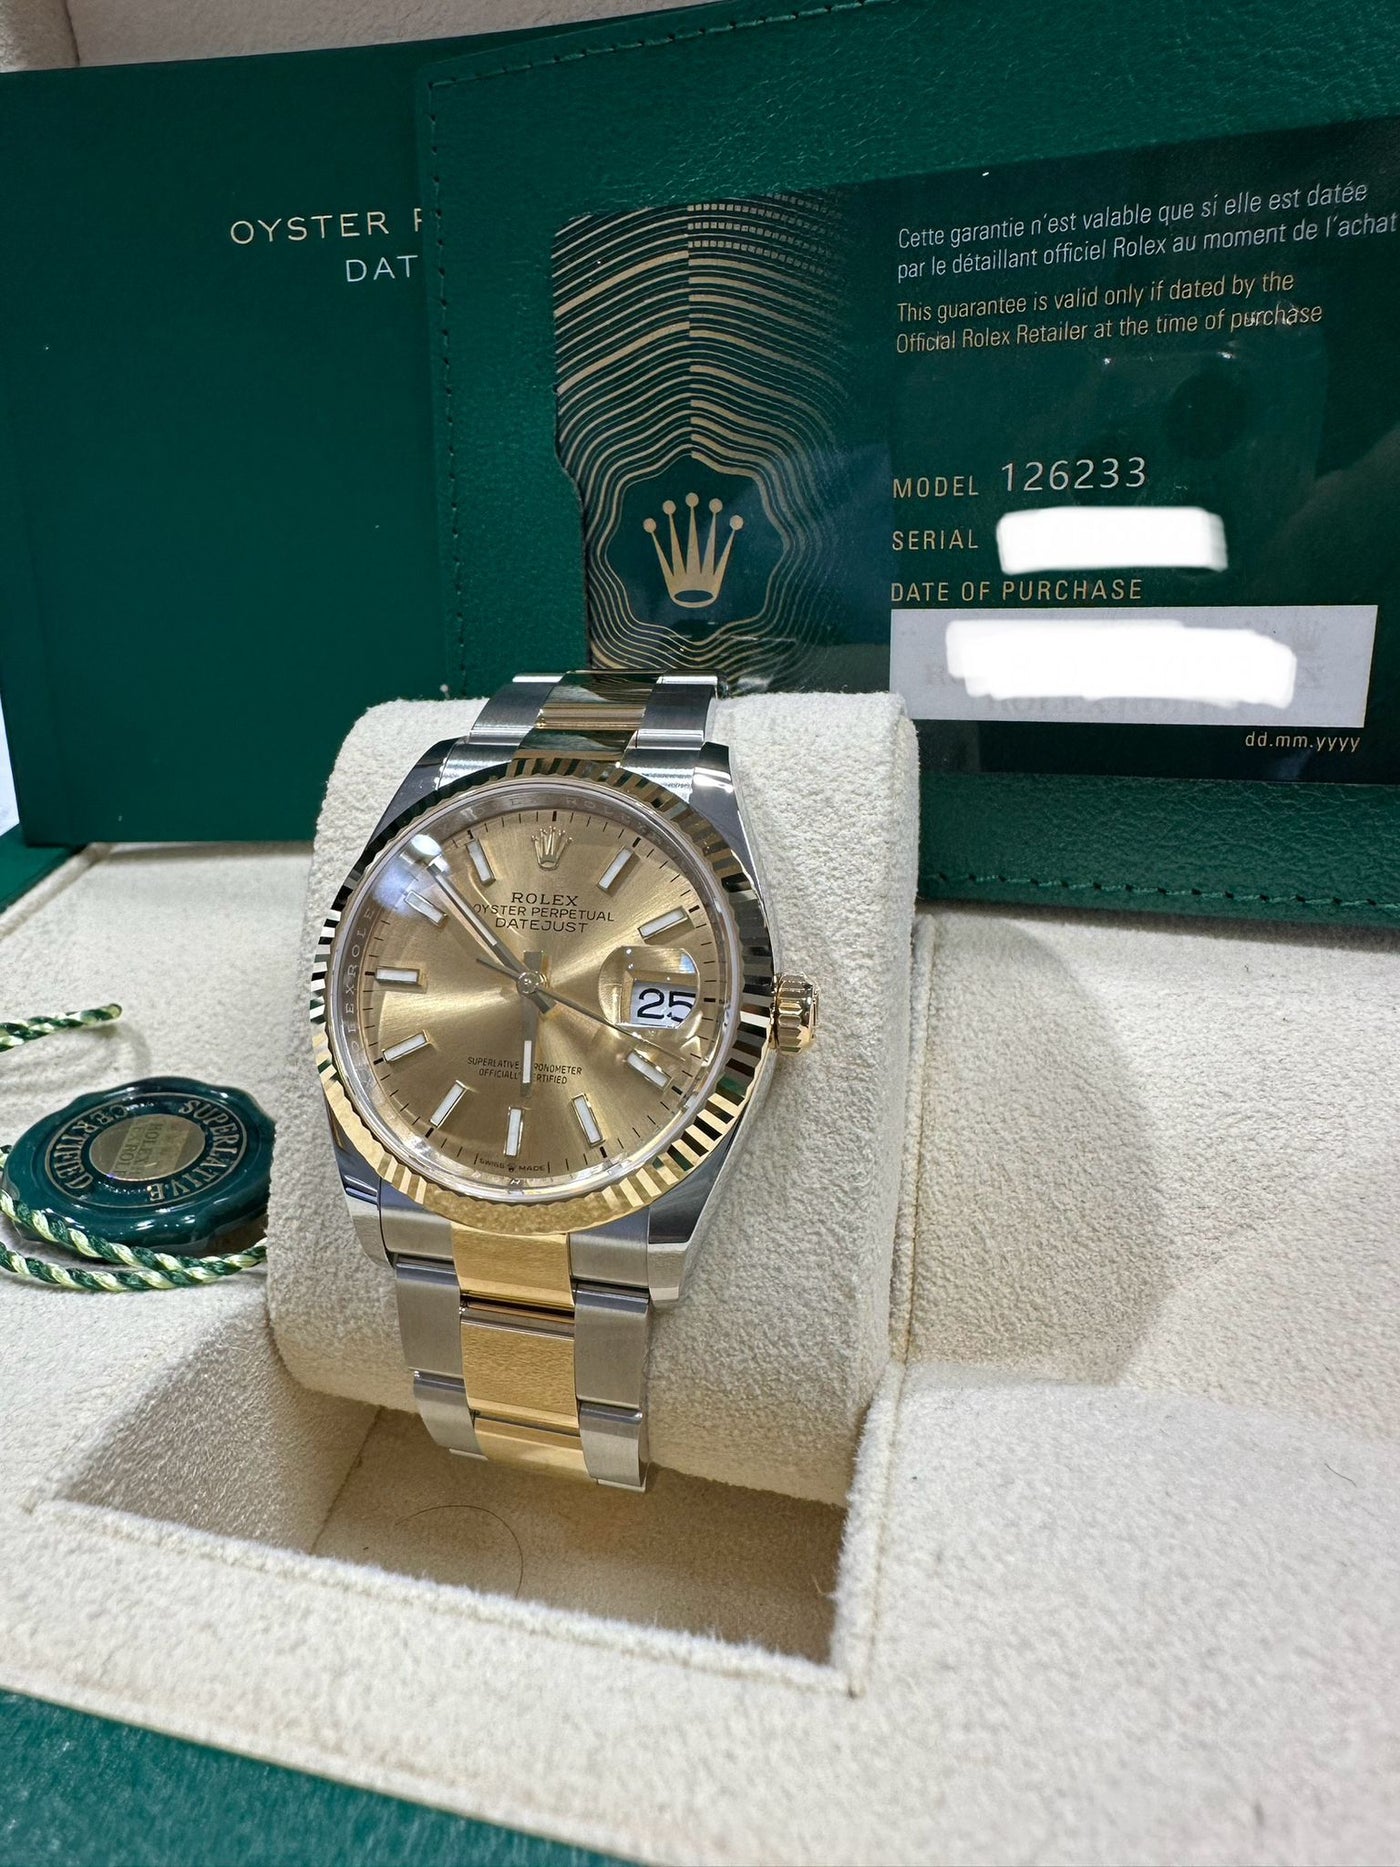 Rolex  Datejust 36, Oyster, 36 mm, Oystersteel and yellow gold features,  Champagne-colour dial, oyster bracelet, 126233